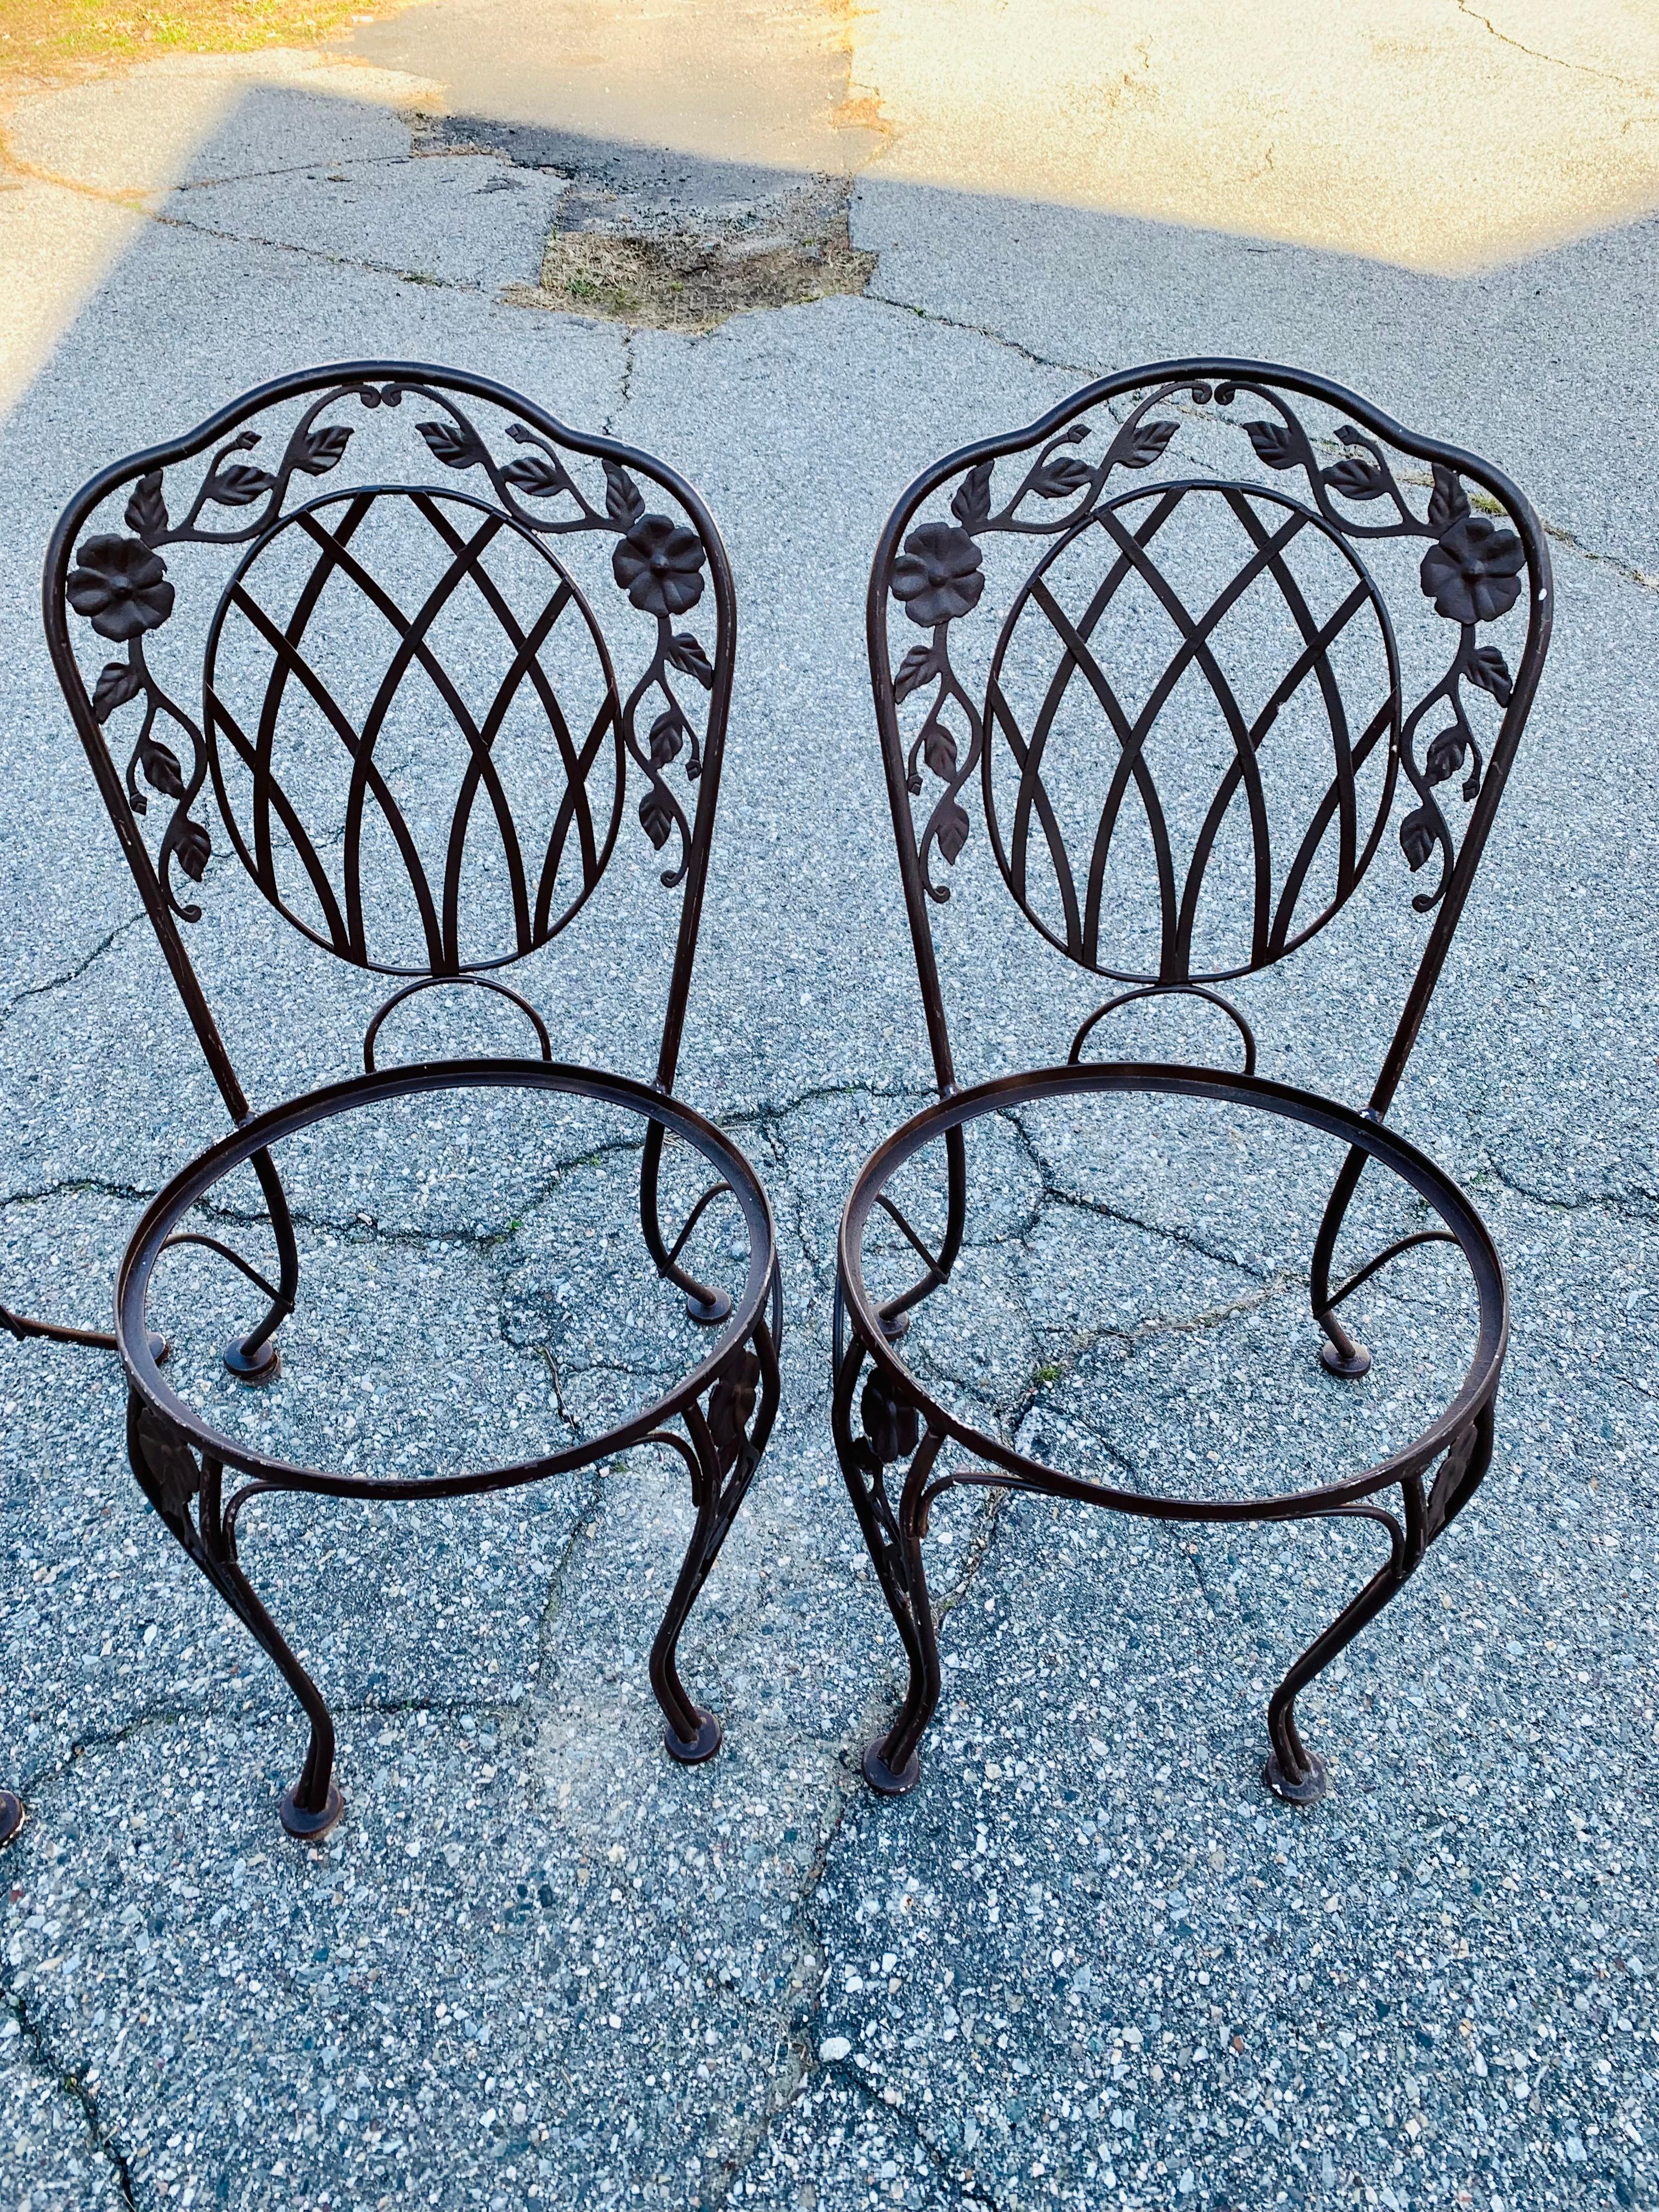 Vintage Wrought Iron Outdoor Seating A Set of 6 Chairs

Perfect for any dining space to accommodate six people. Pairs excellent with the matching 60” dining table. Place these on your deck, garden, or patio while entertaining guests. Ships along